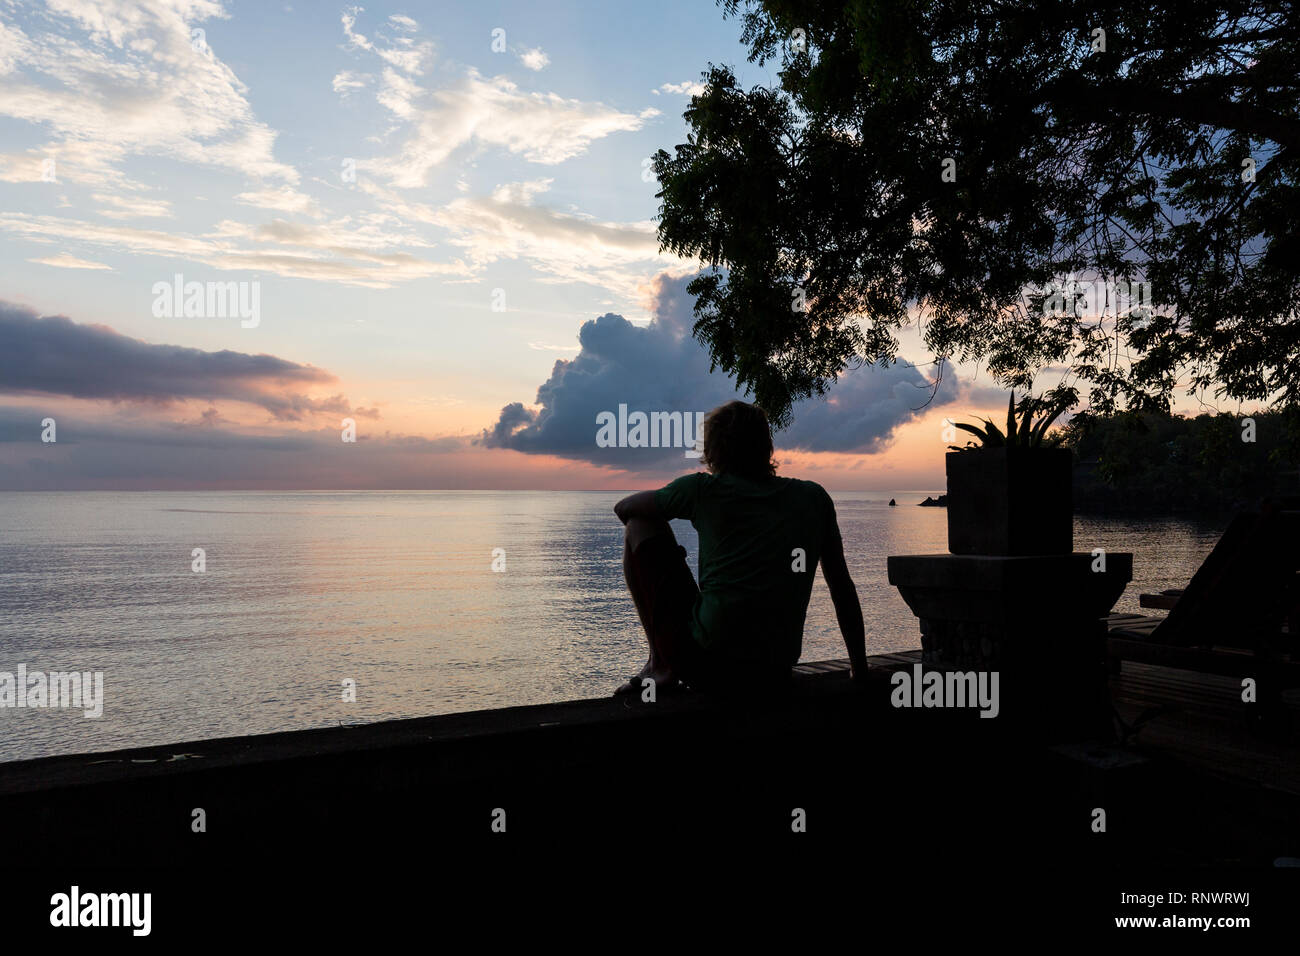 A man looks out at a colorful sunset over the ocean in Tulamben, Bali. Stock Photo